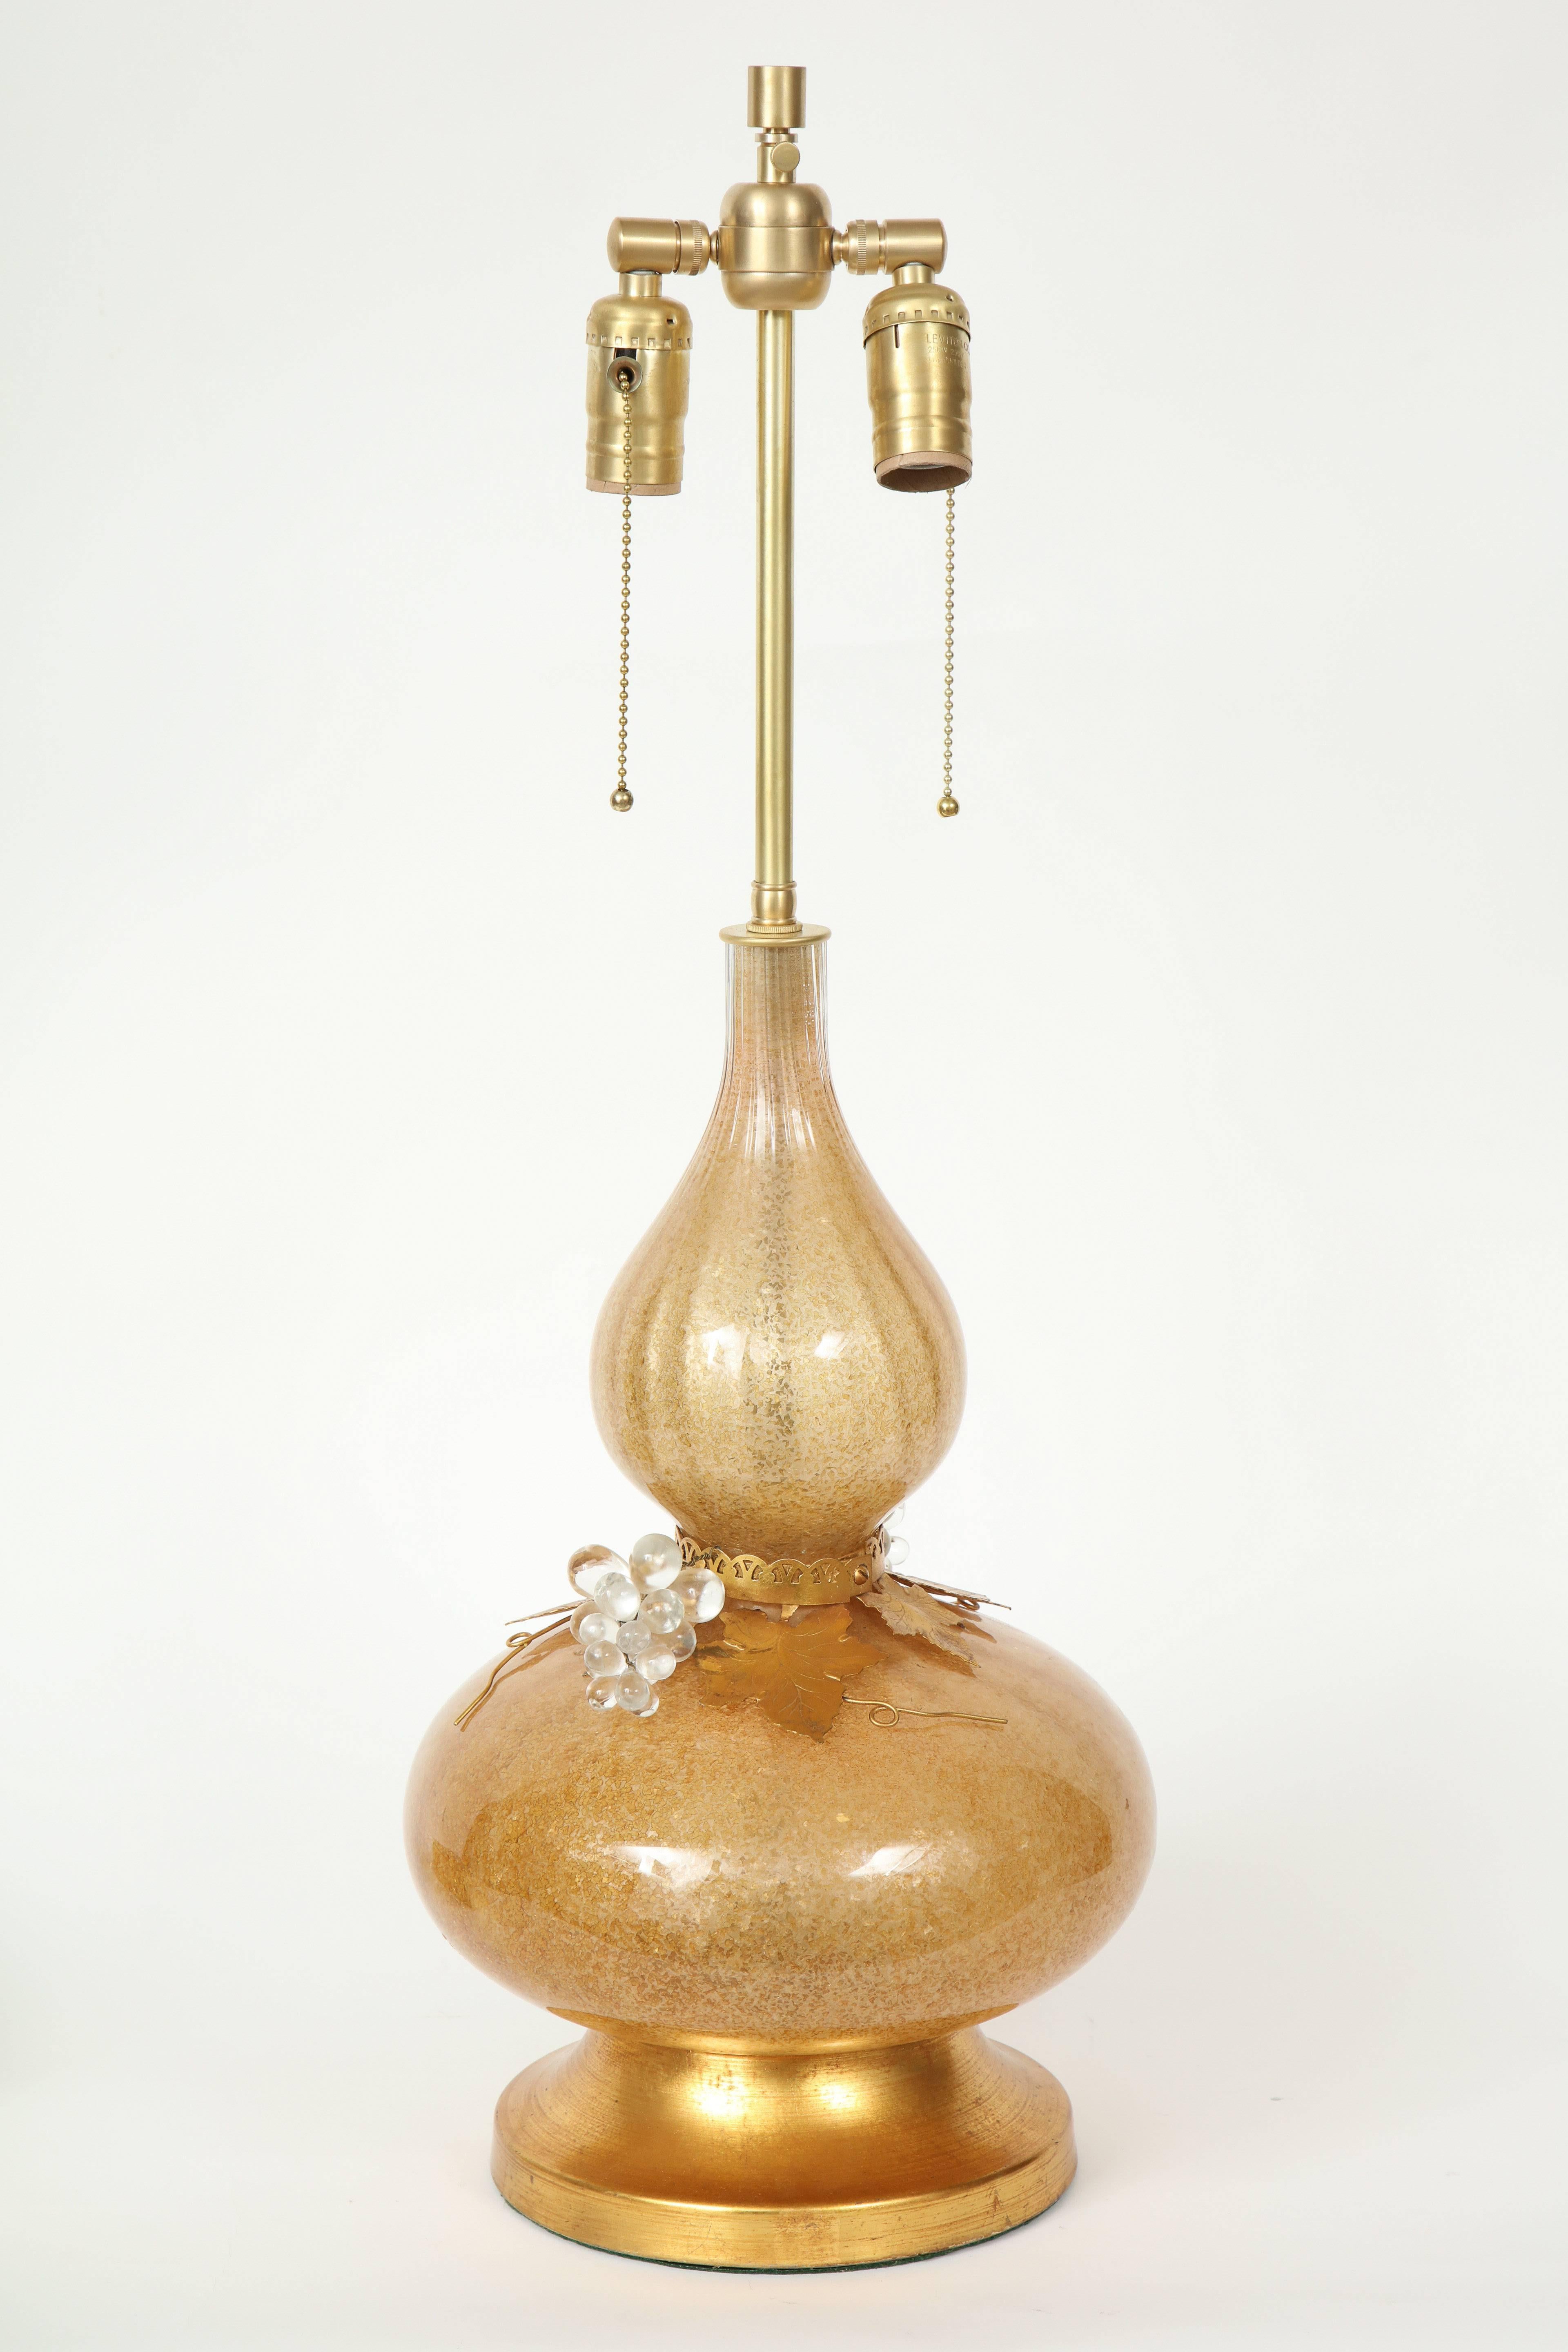 Mid-Century Murano glass genie bottle shaped lamps in a rich gold tone with crushed glass pieces applied to the interior. 22 karat gilt washed leaves and clear glass grapes adorn the cinched middle. Lamps rest on 22 karat gold washed brass bases.